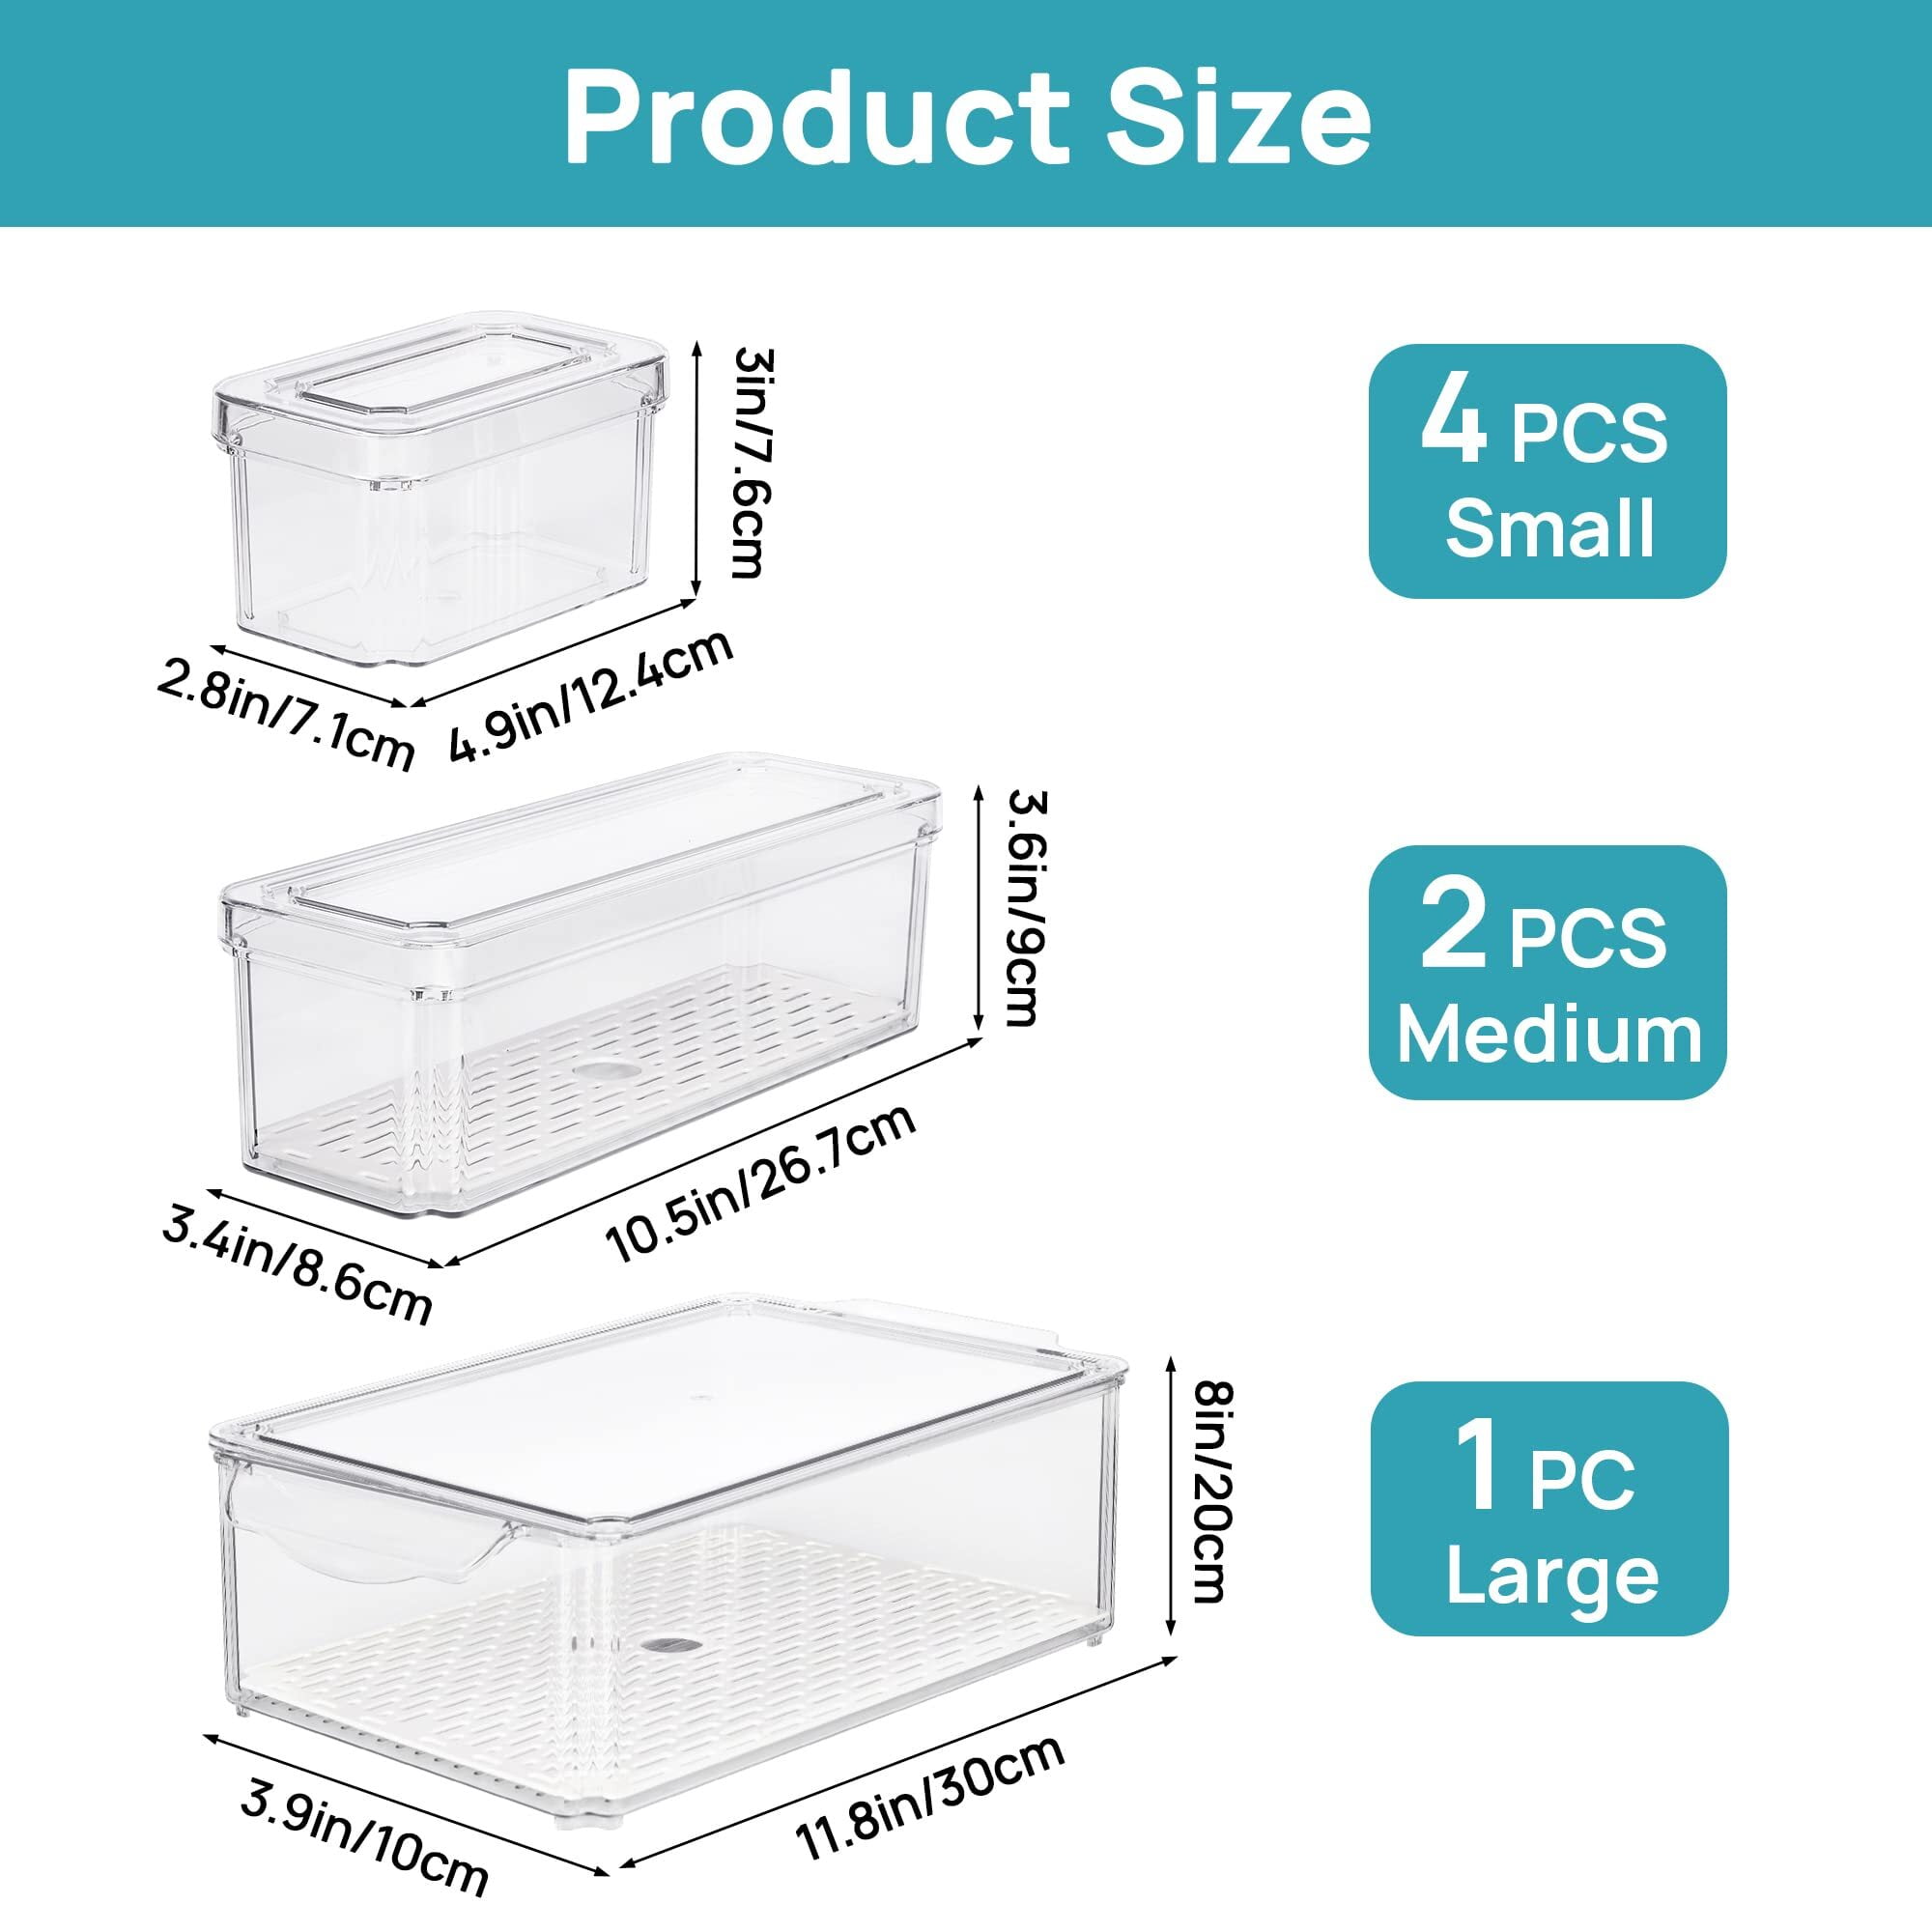 Vtopmart Breastmilk Storage Container 4PCS Set, Clear Freezer and Frid